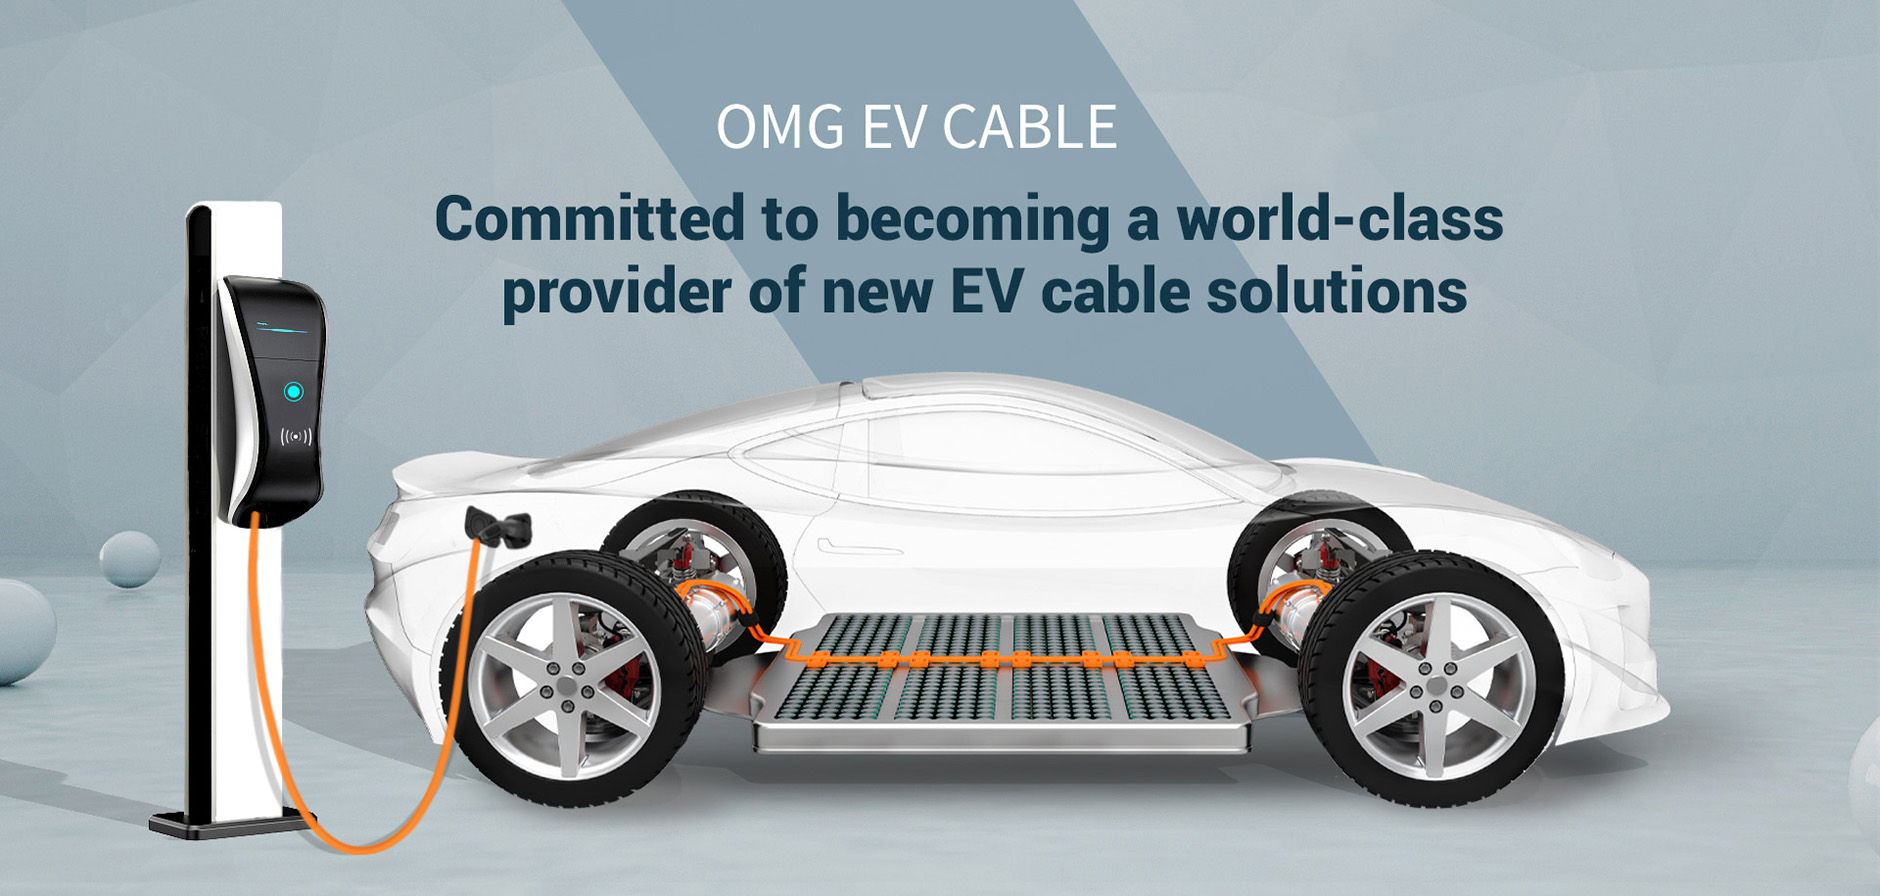  OMG EV CABLE is committed to become a global first-class new energy vehicle cable solution provider